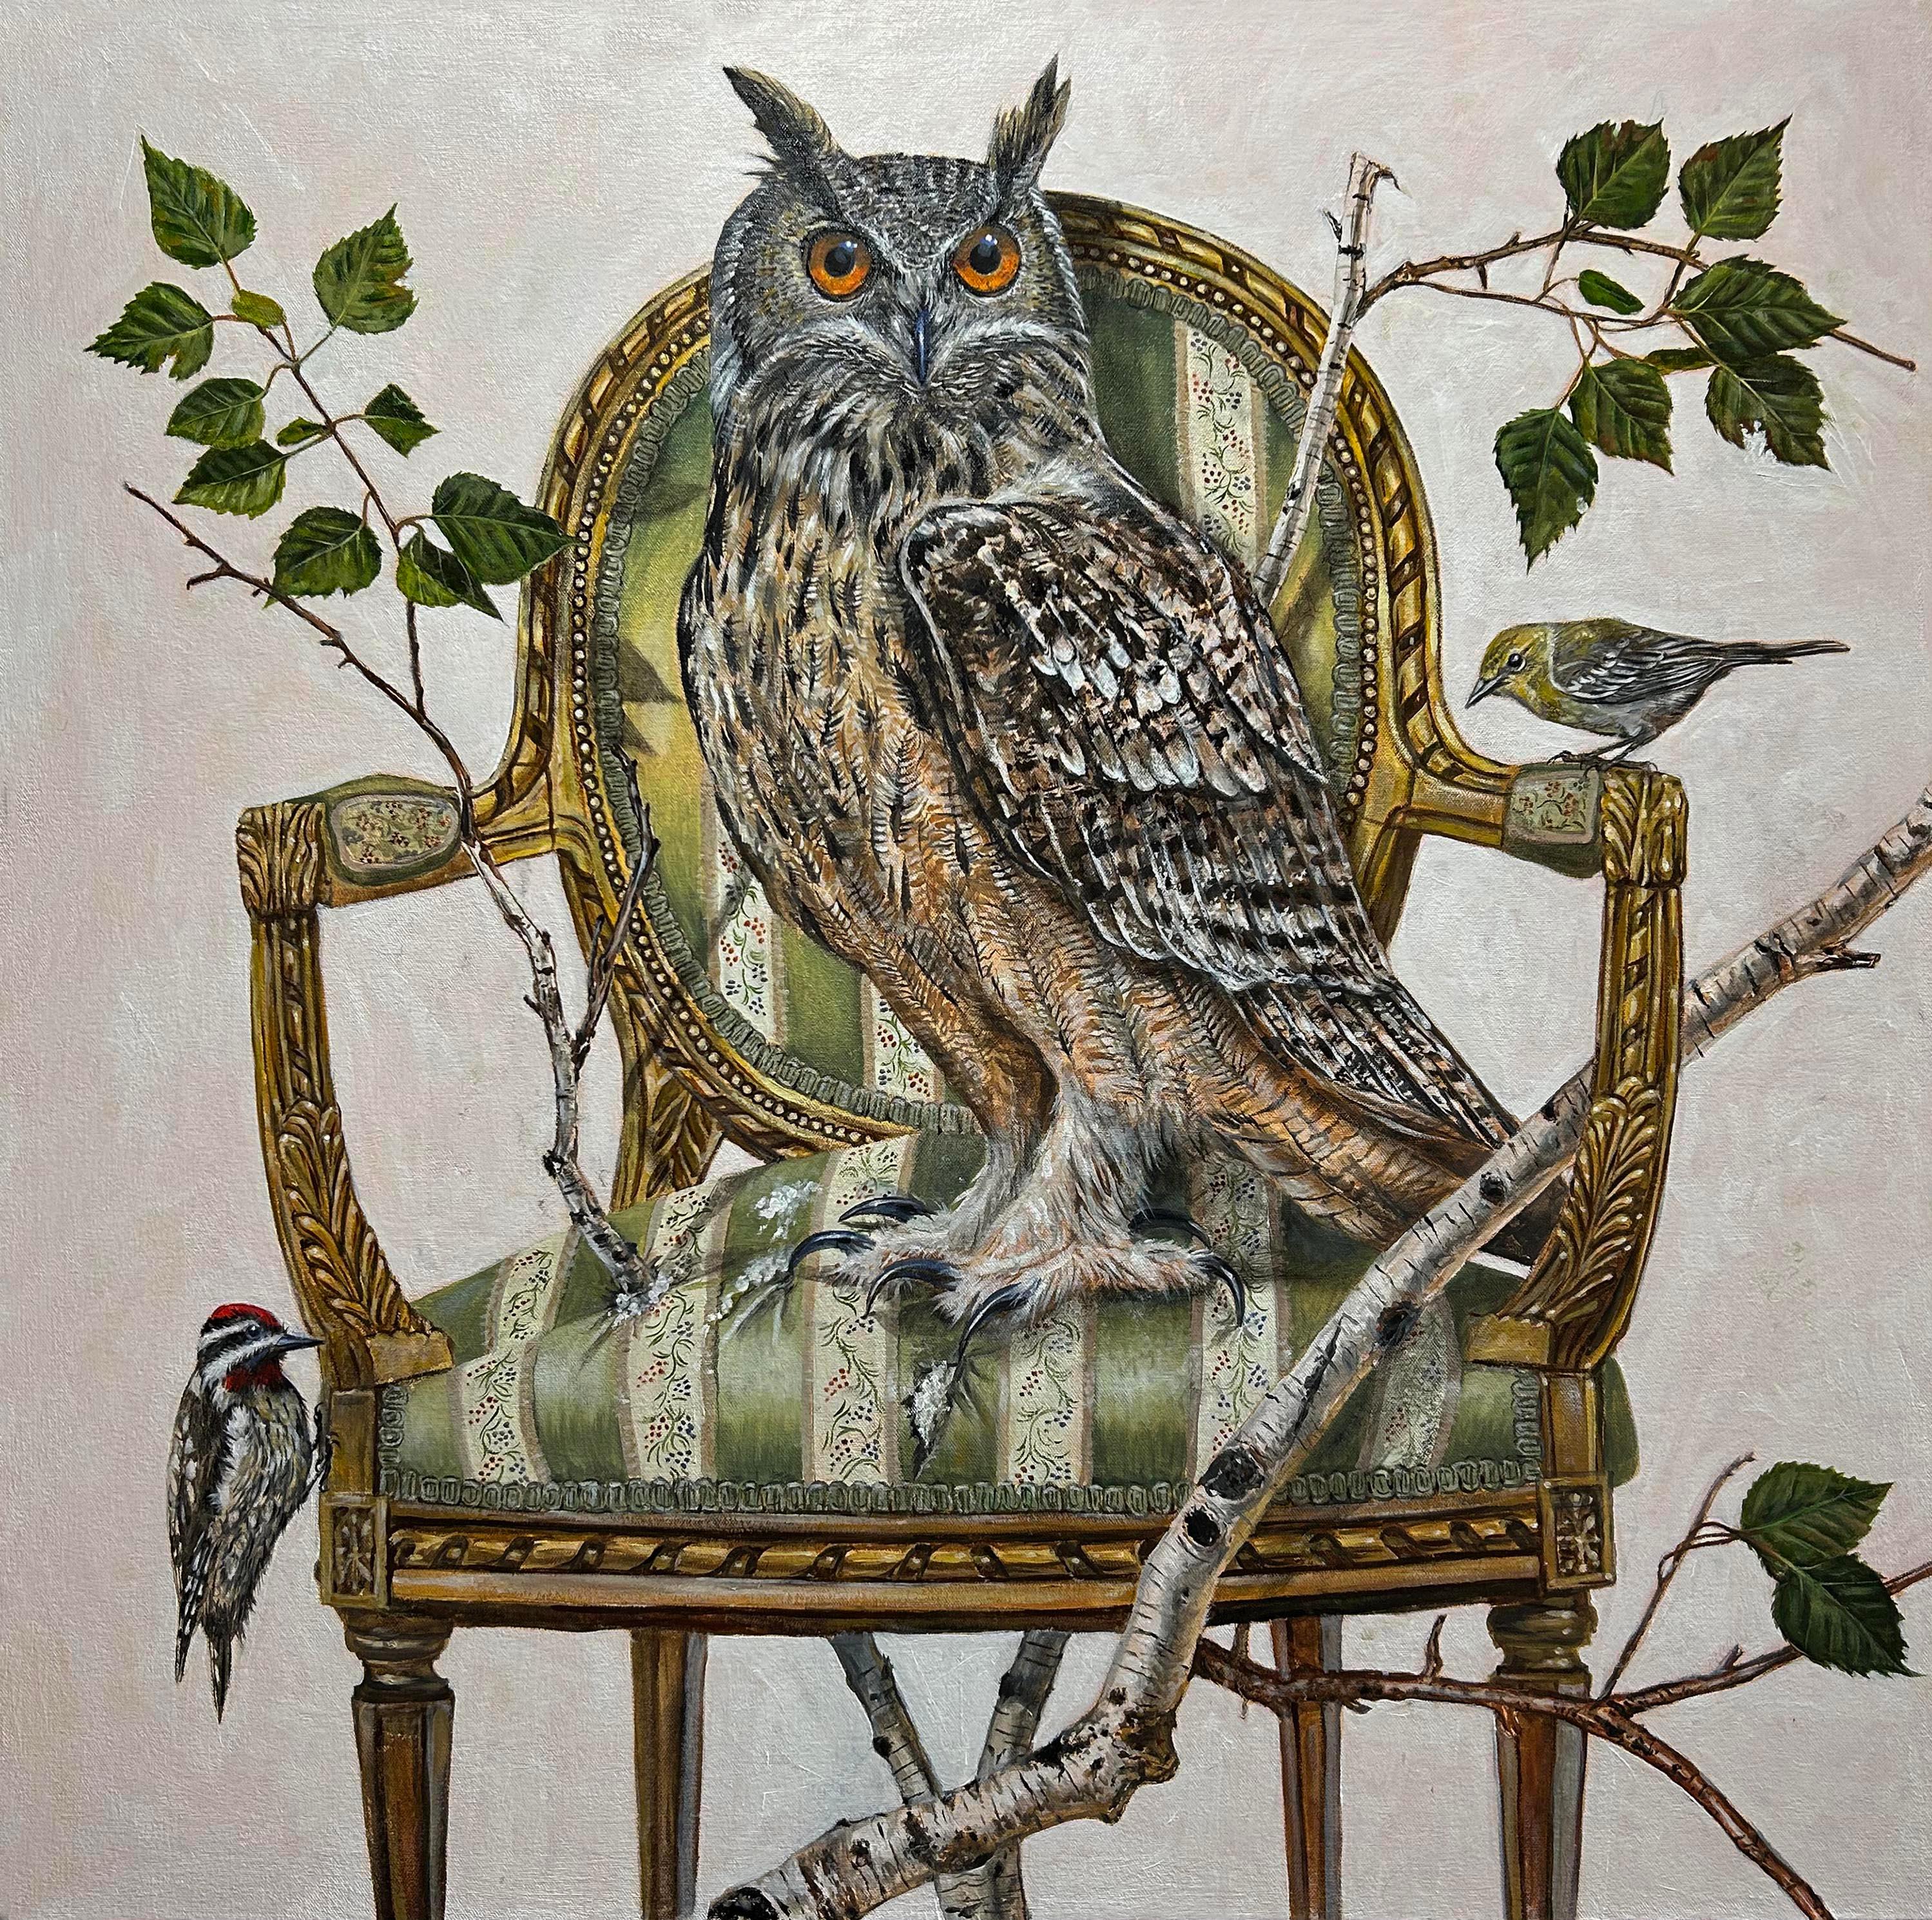 Thomas Broadbent Still-Life Painting - "The Perch" Flaco the owl painting, oil on canvas, contemporary surrealist 